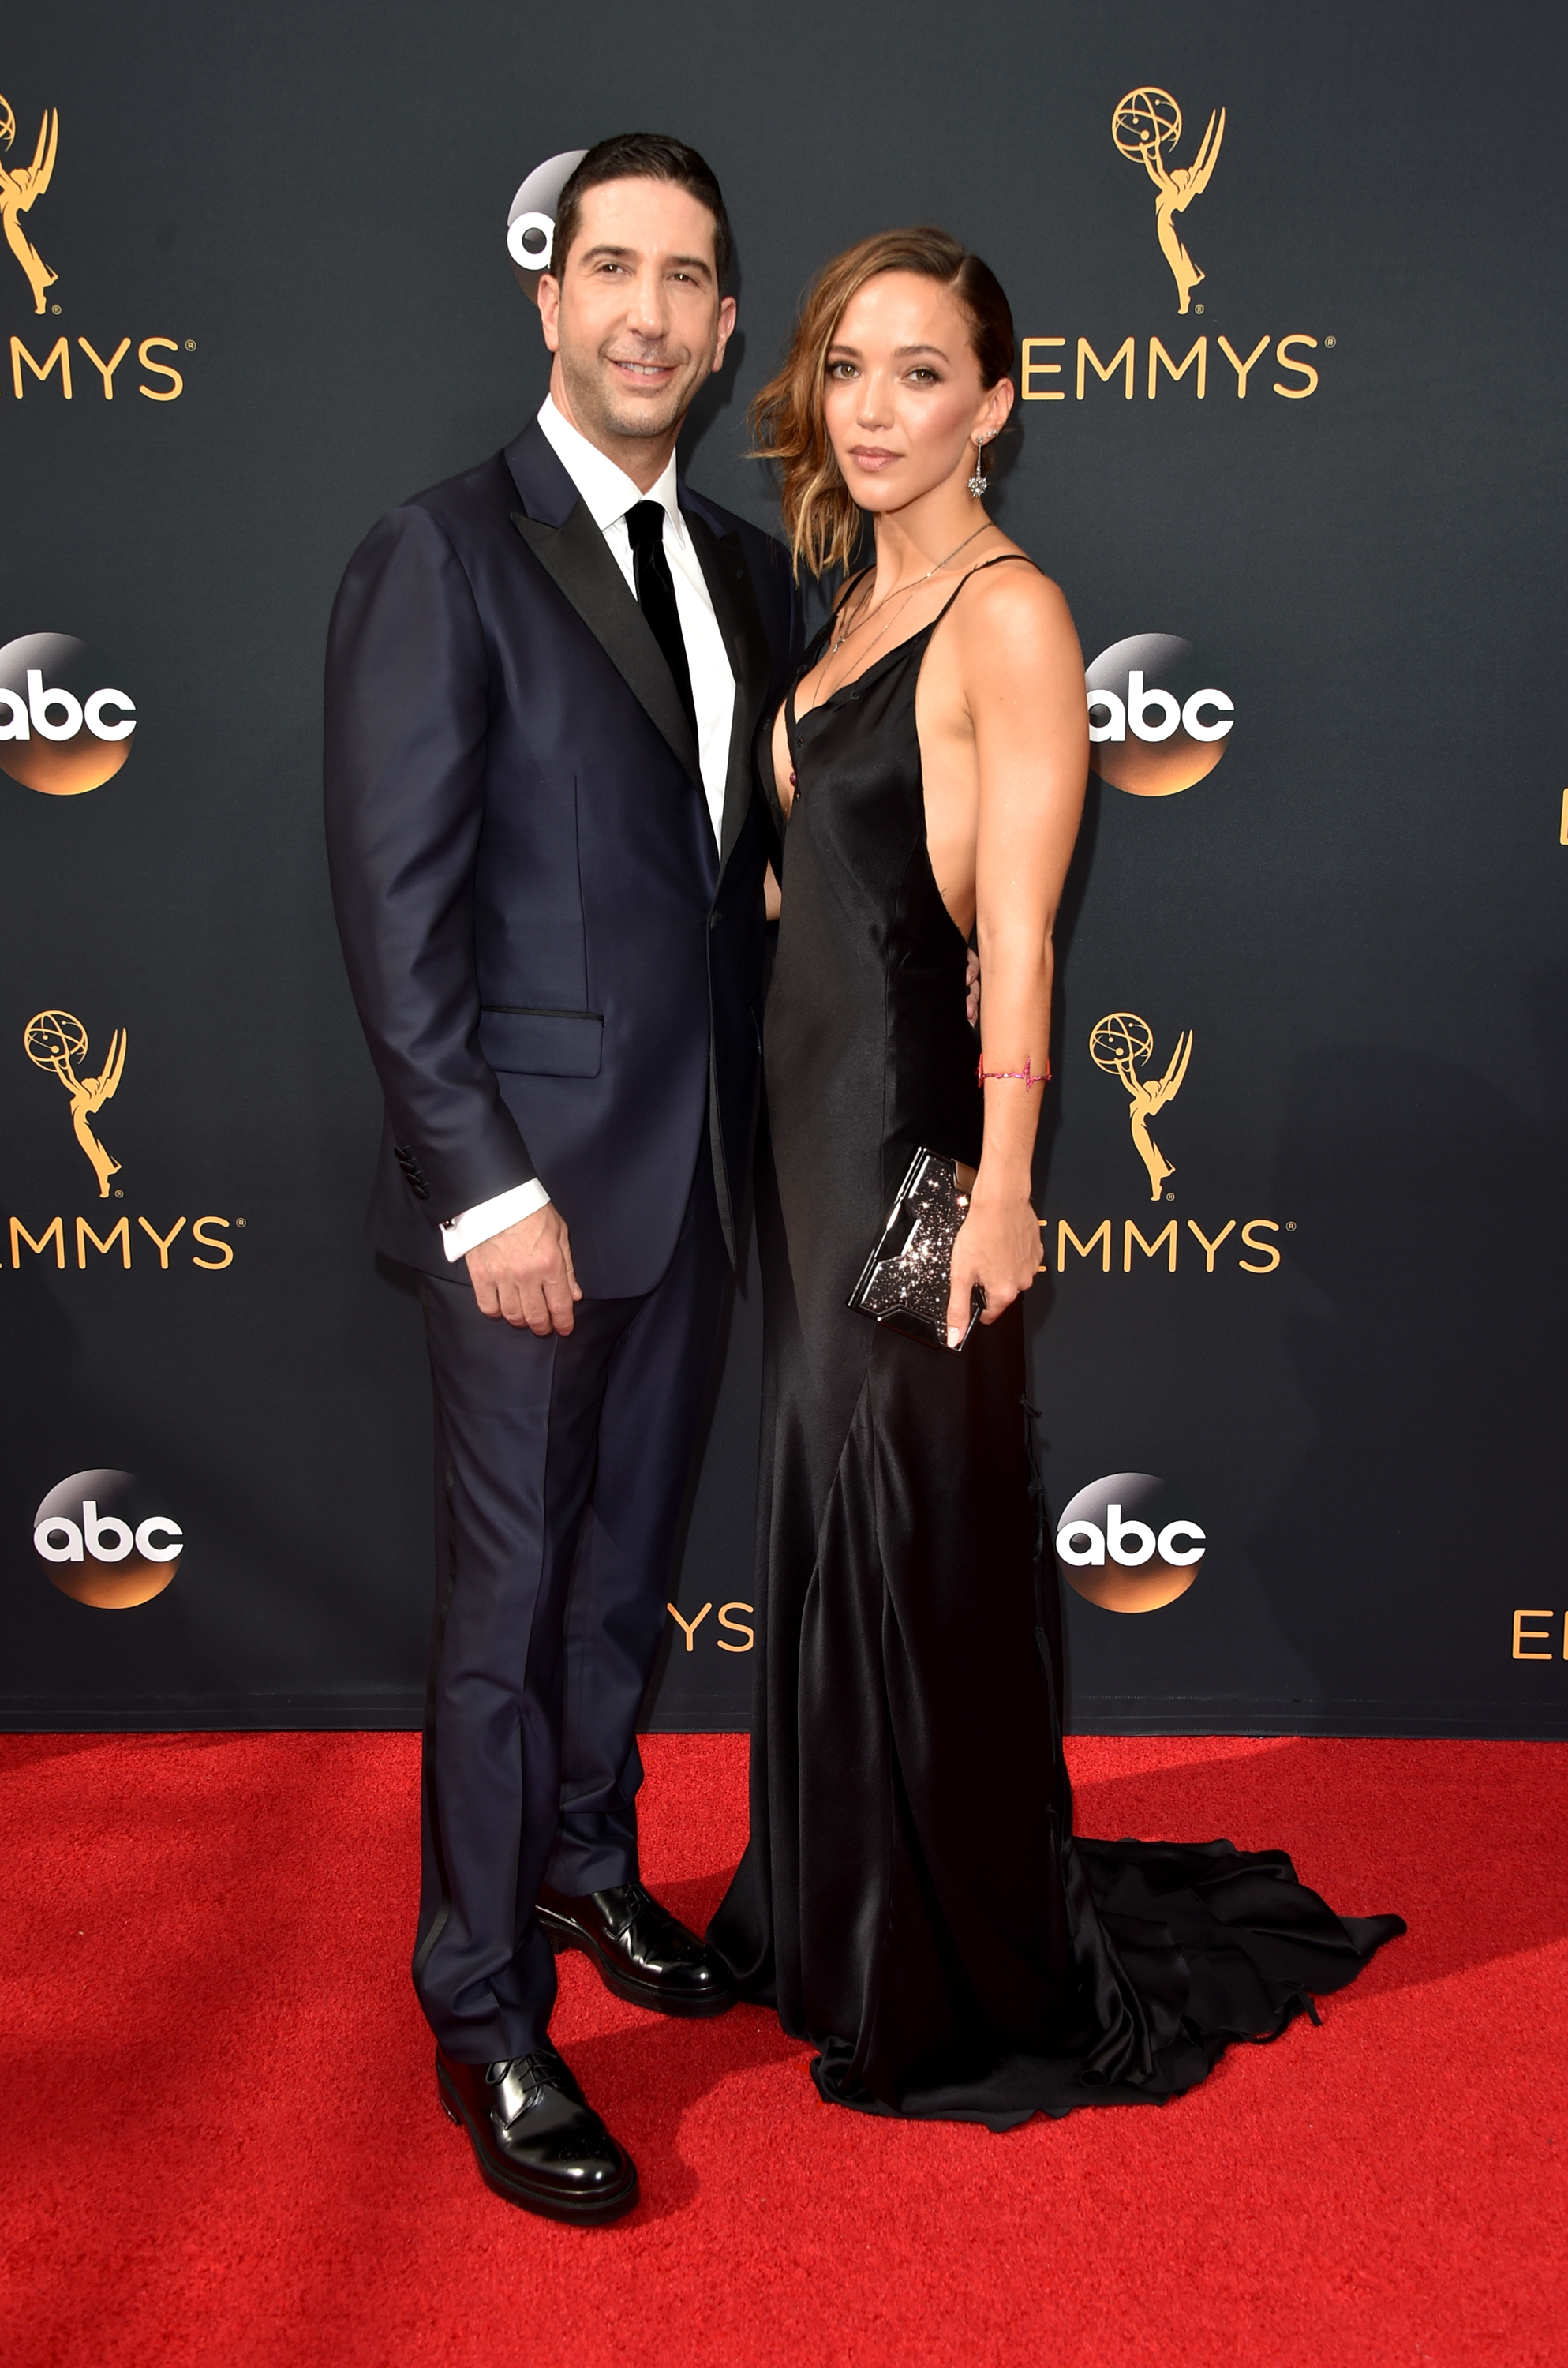 David Schwimmer and Zoe Buckman arrive at the 68th Annual Primetime Emmy Awards at Microsoft Theater on September 18, 2016 in Los Angeles.